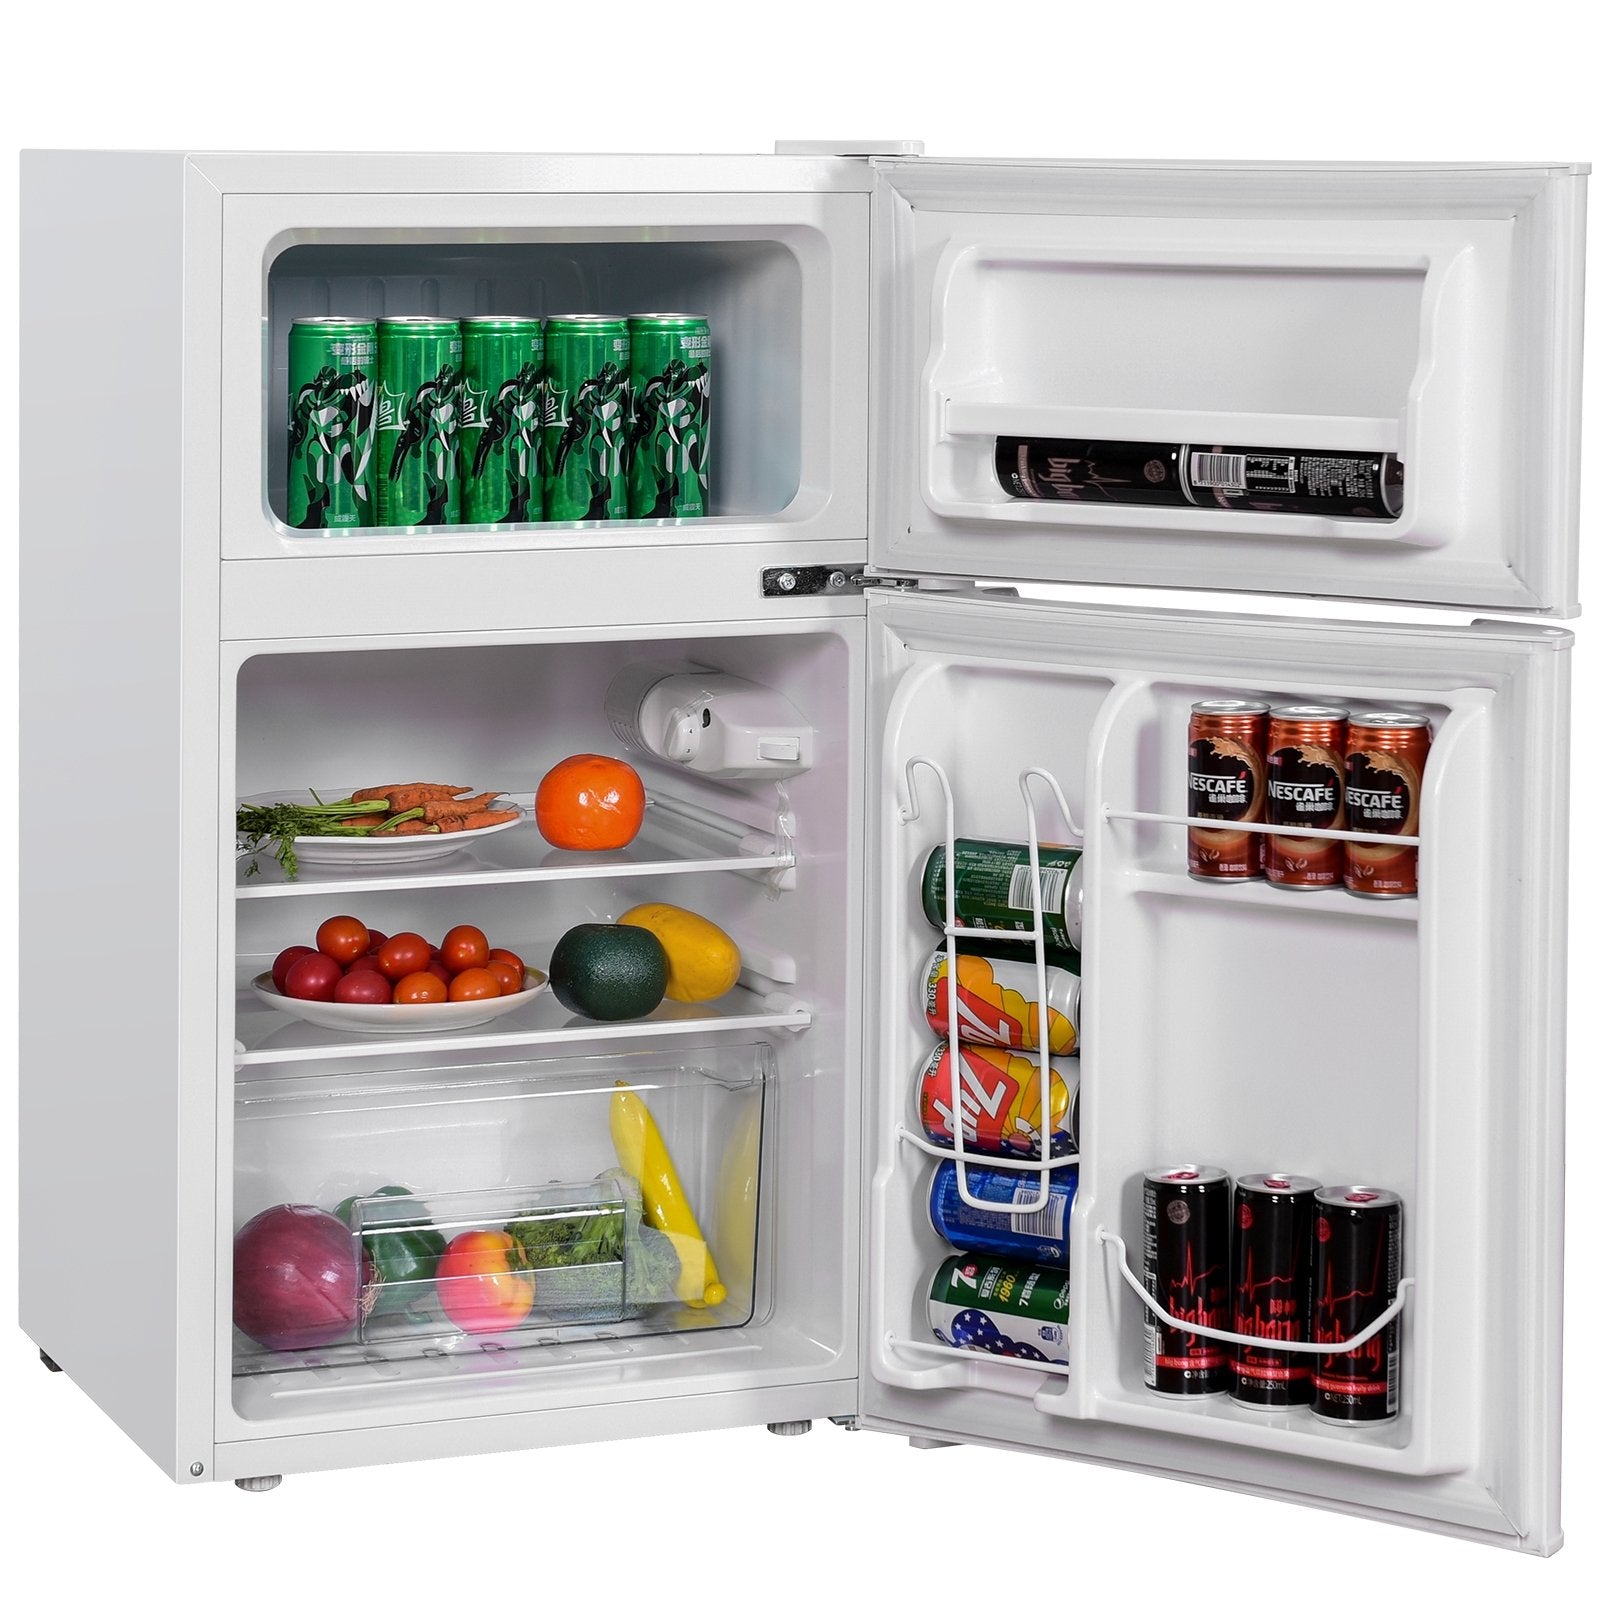 3.2 cu ft. Compact Stainless Steel Refrigerator, White - Gallery Canada